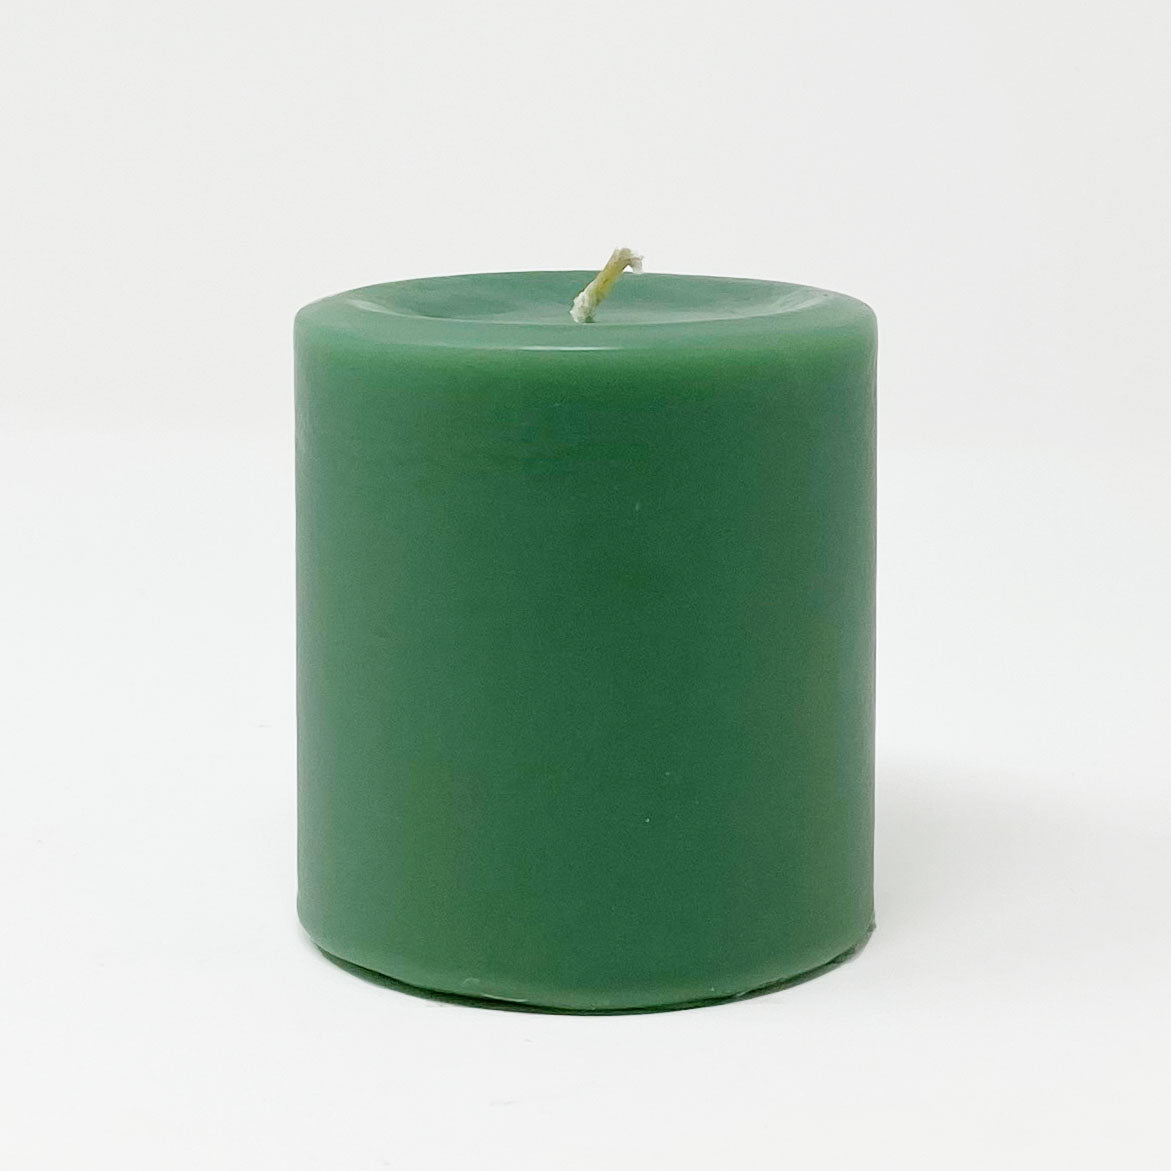 3x3" Colonial Green Pillar Candle